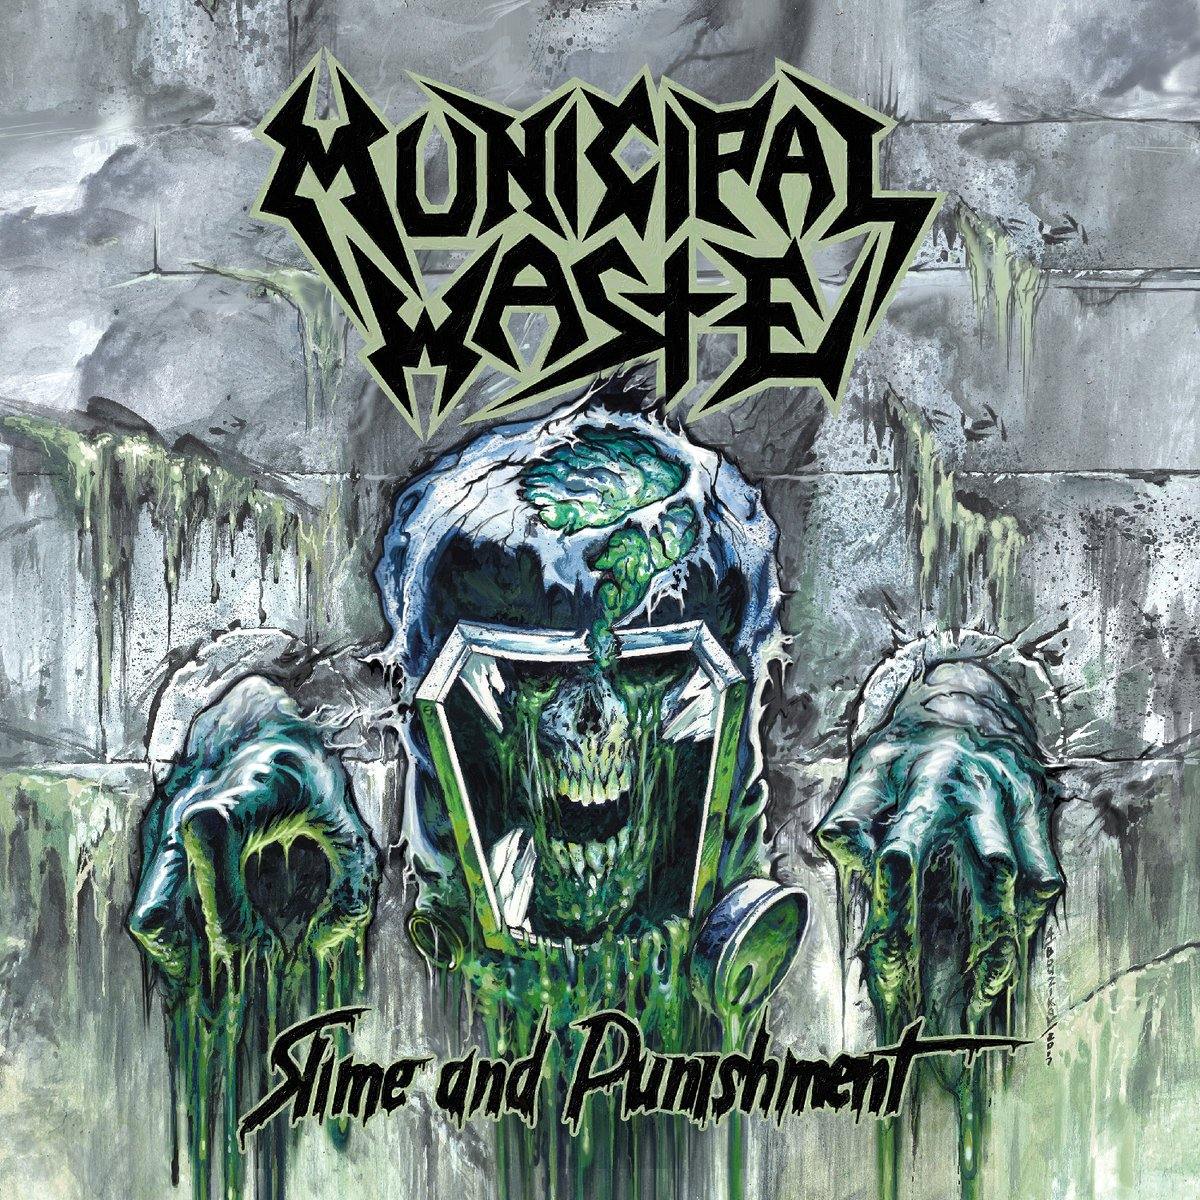 Buy – Municipal Waste "Slime and Punishment" CD – Band & Music Merch – Cold Cuts Merch